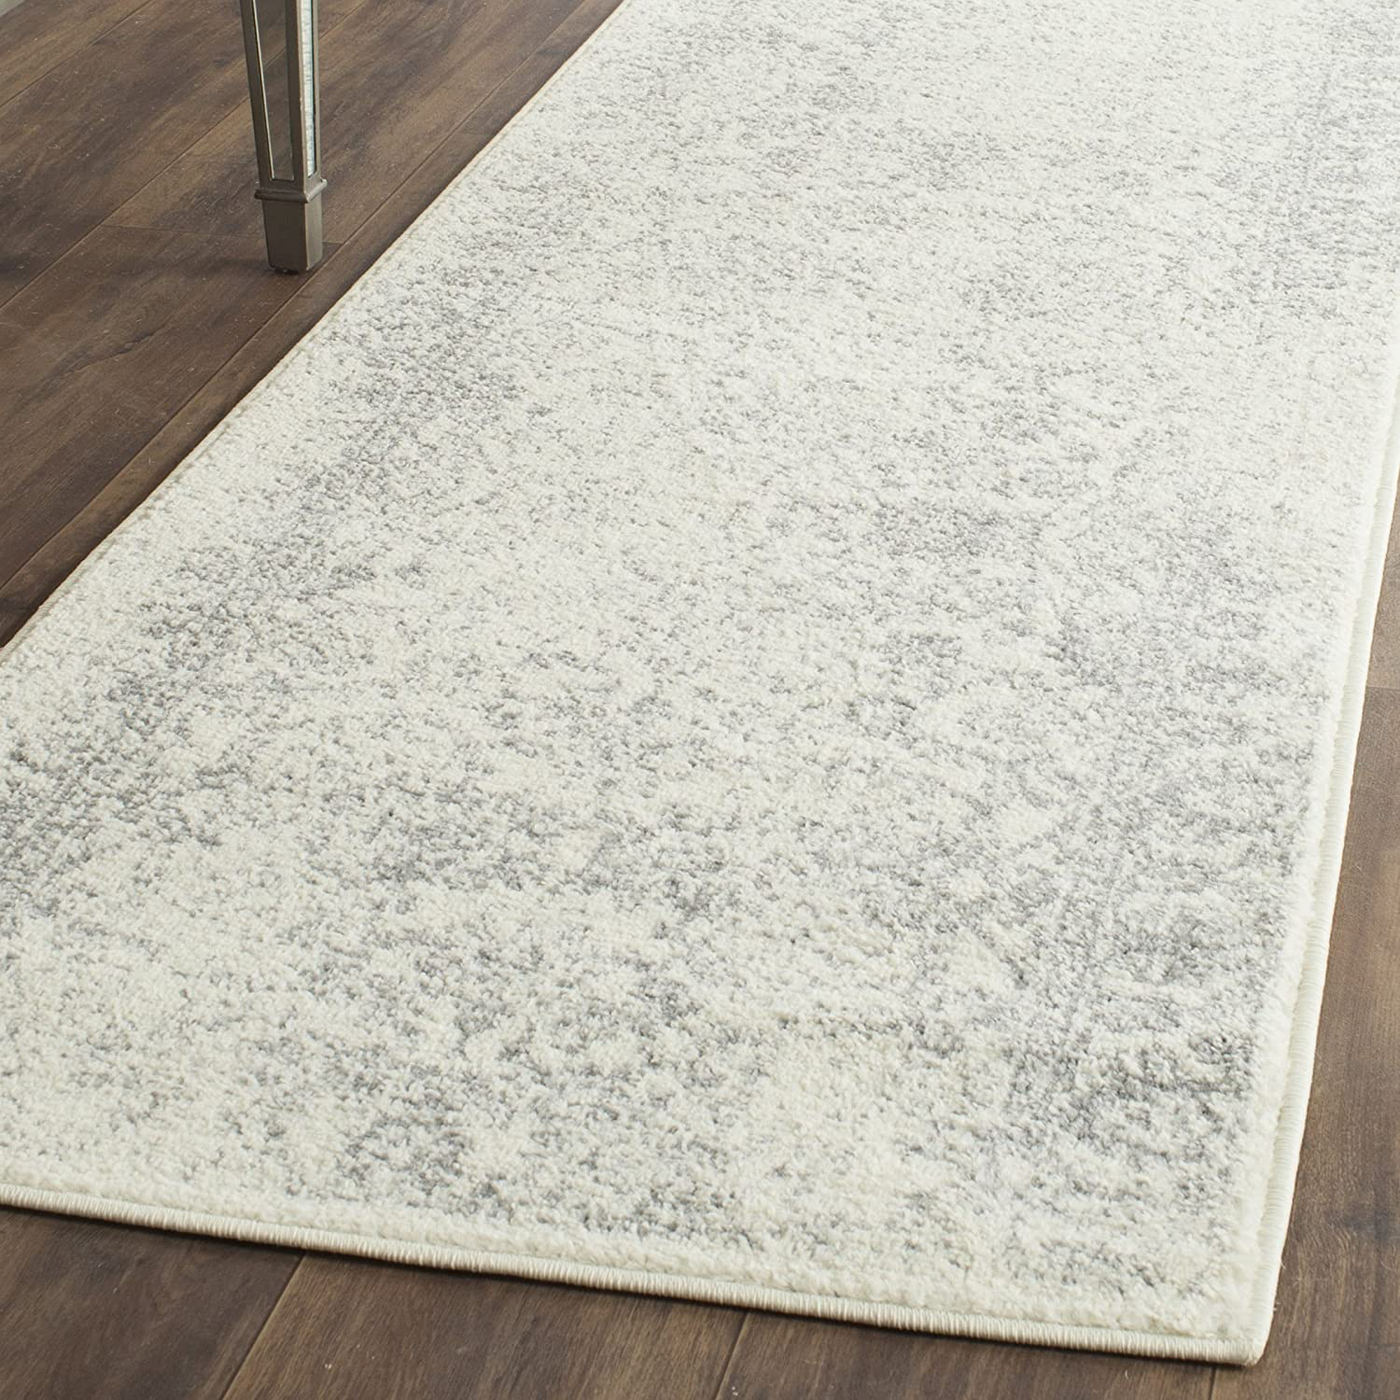 Safavieh Adirondack Collection ADR109C Oriental Distressed Non-Shedding Stain Resistant Living Room Bedroom Runner, 2'6" x 6' , Ivory / Silver